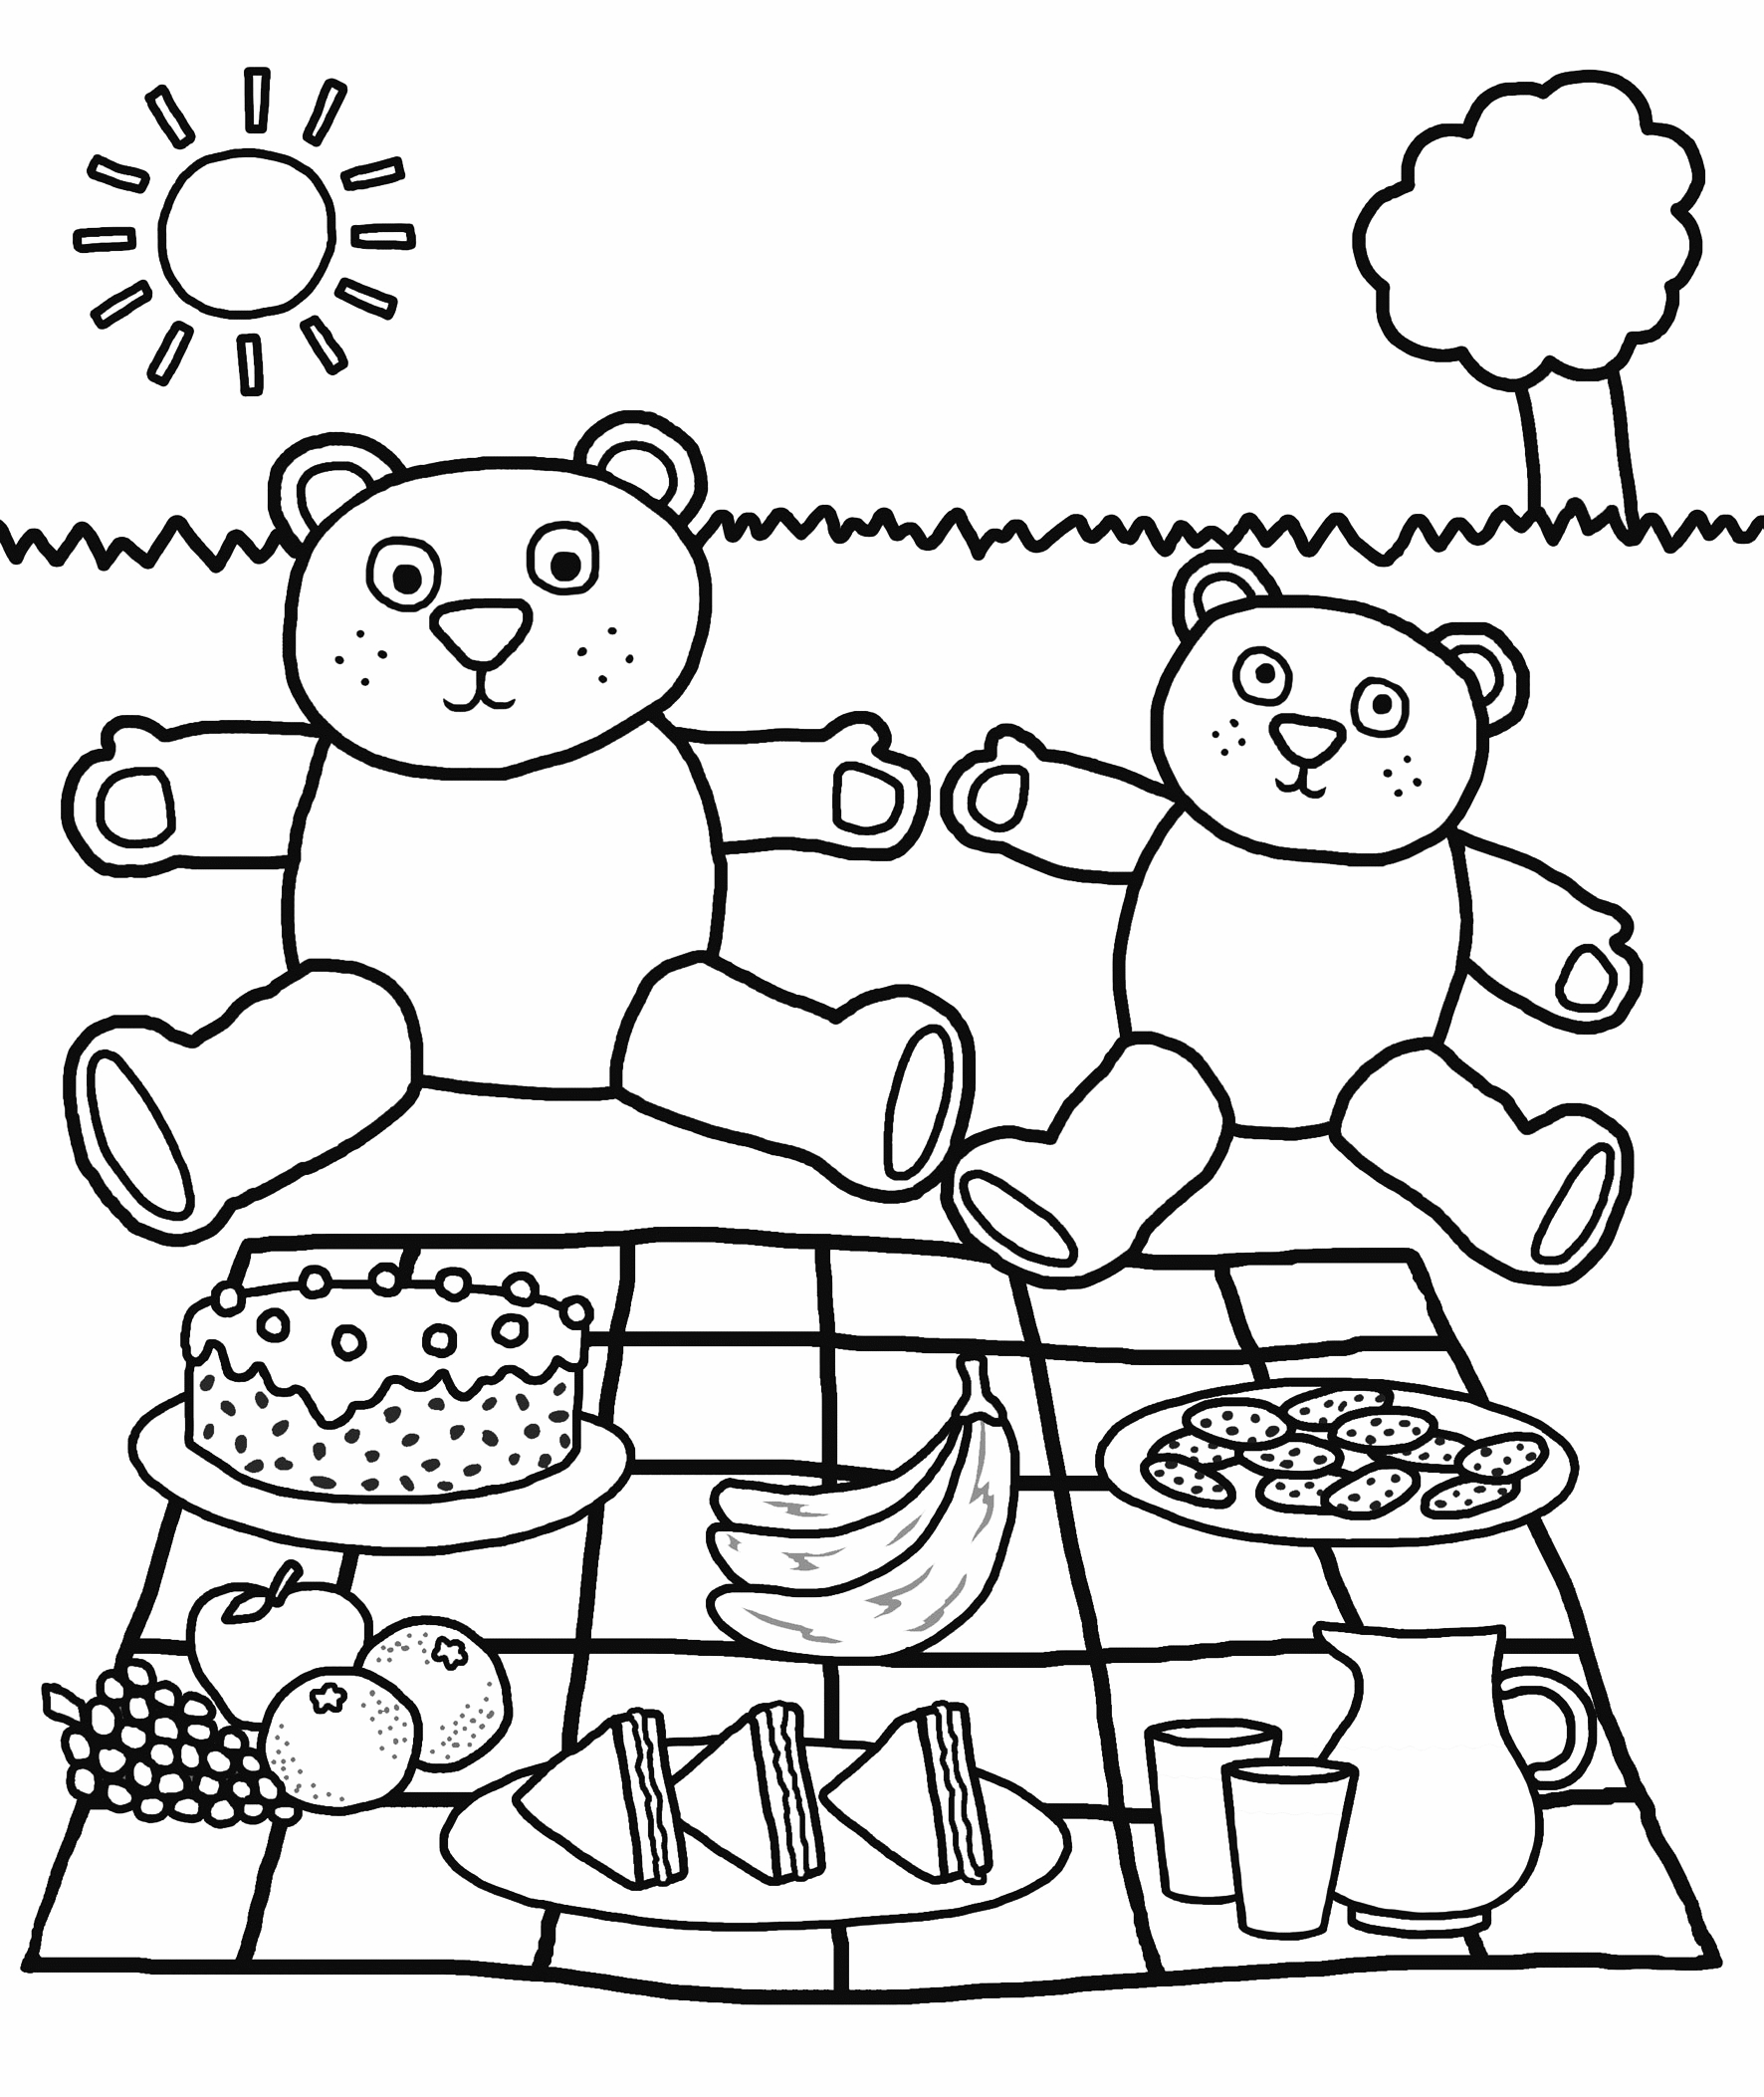 Cute Picnic Spread Coloring Pages